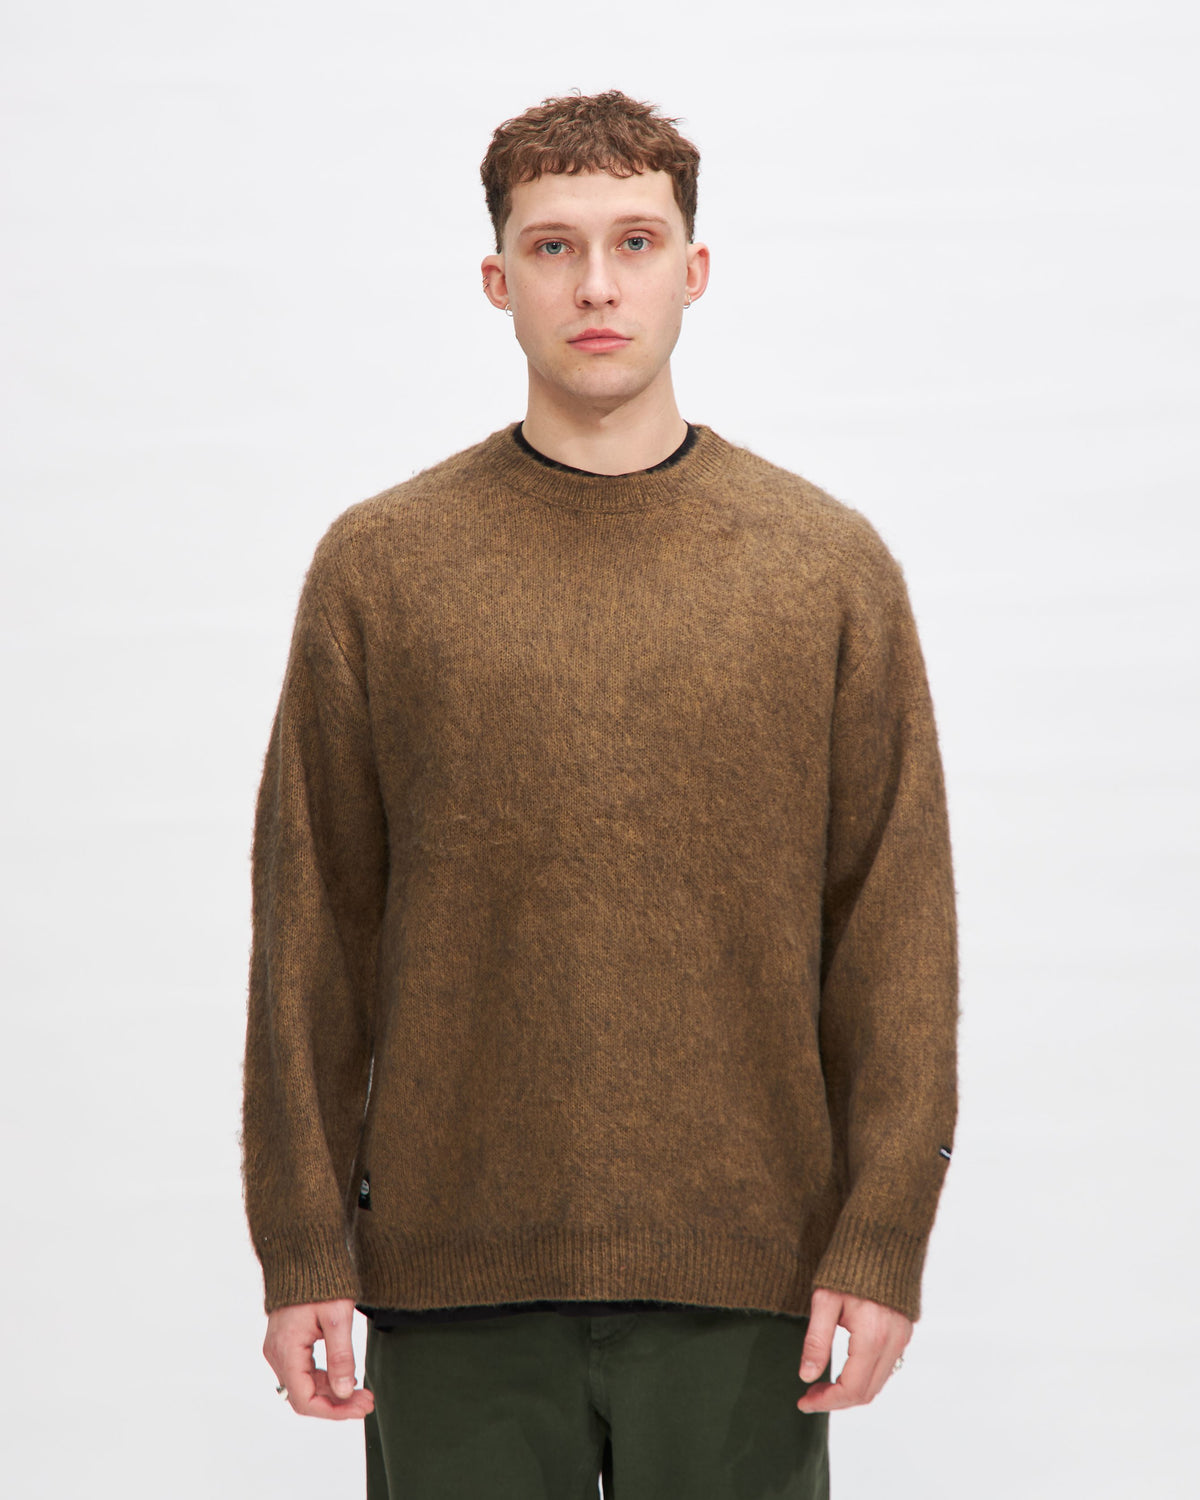 The Milano Deconstructed Knit Swazer - Grey Merino Blend Sweater